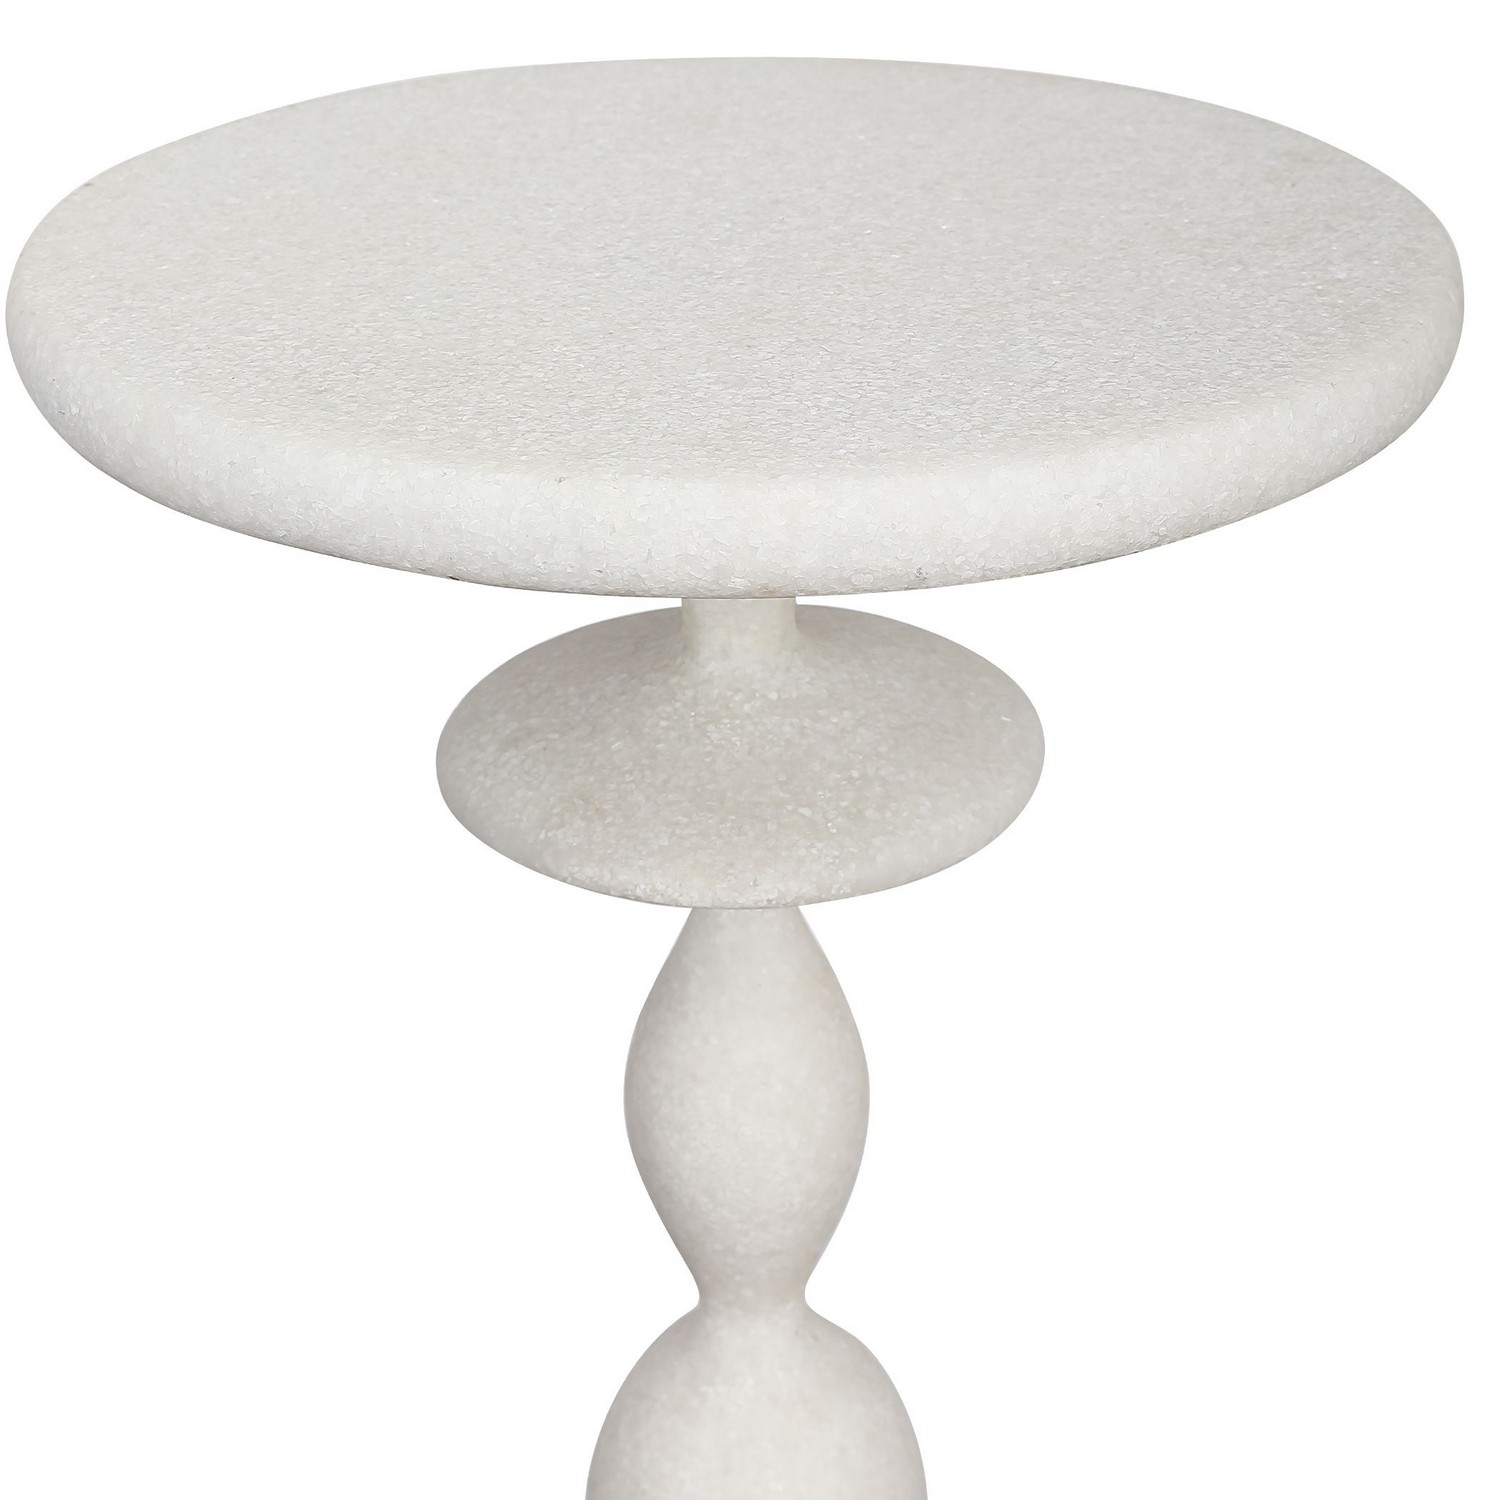 Uttermost Inverse Marble Drink Table - White